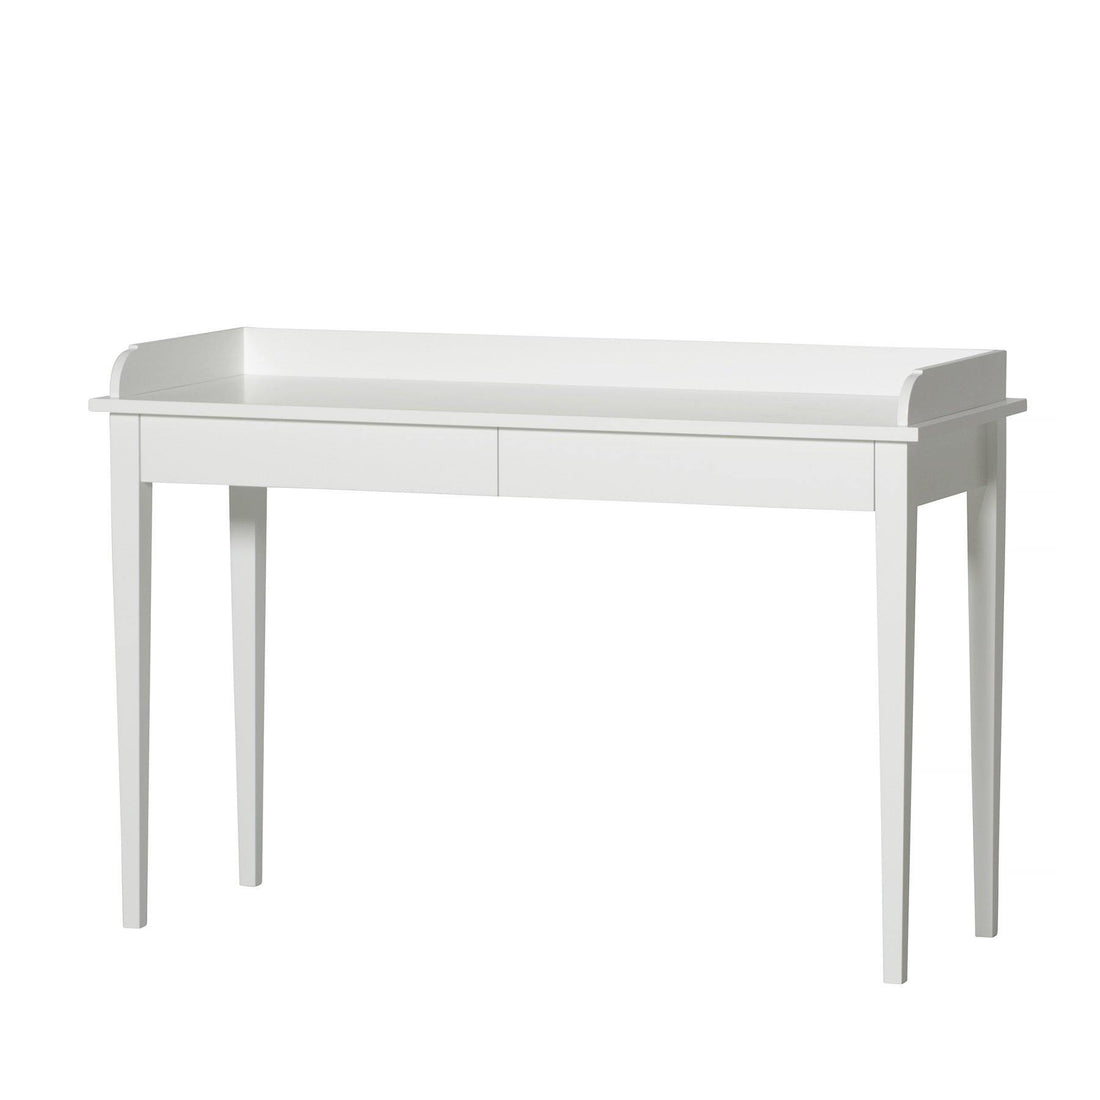 oliver-furniture-seaside-console-table-white- (2)